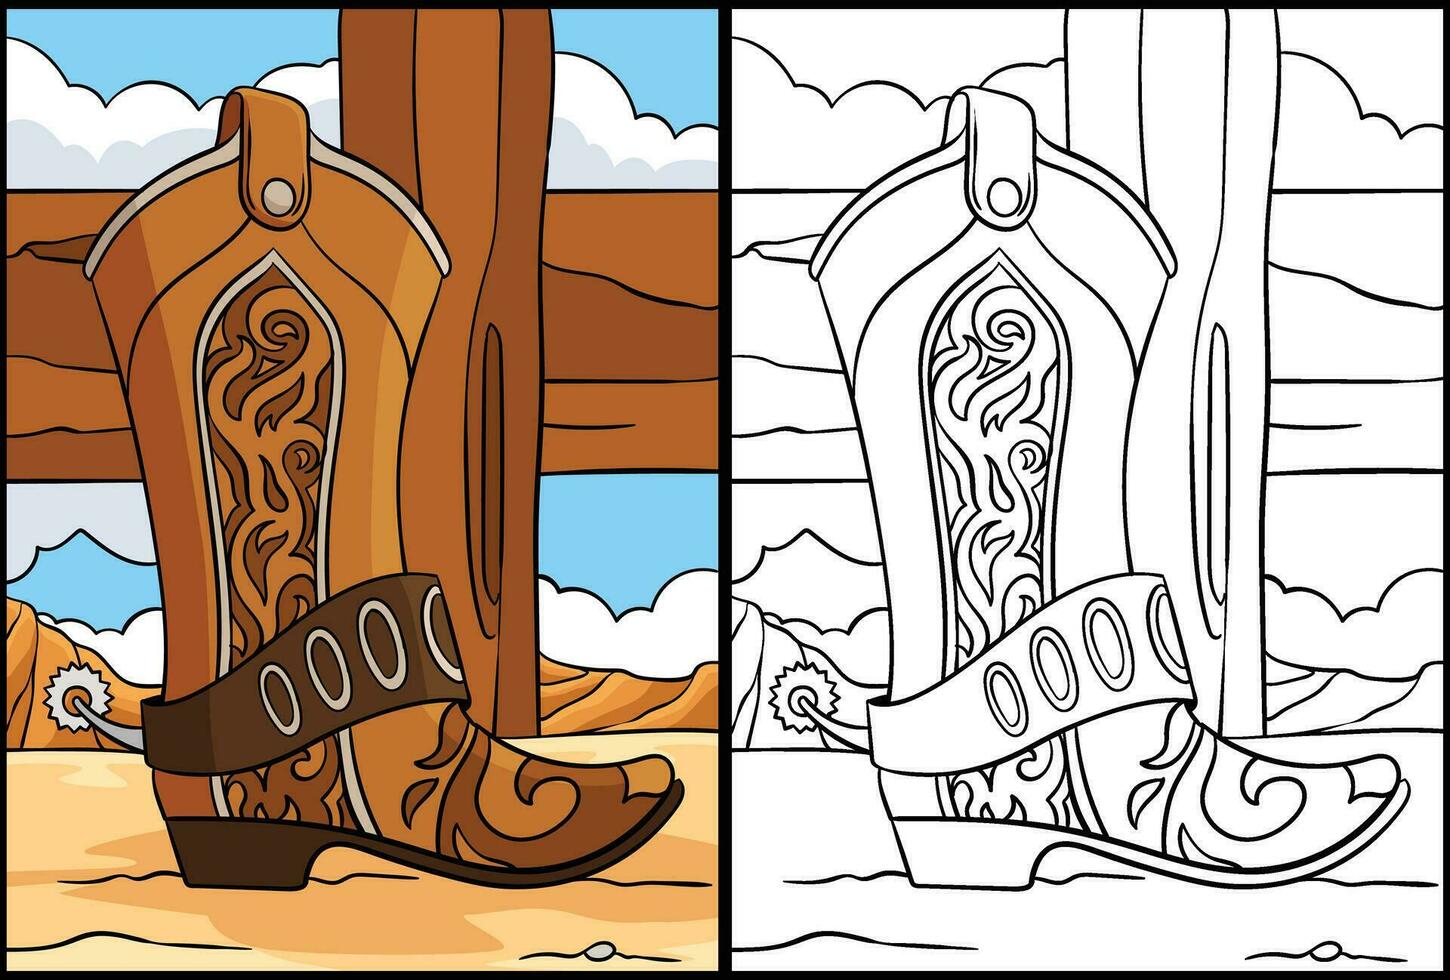 Cowboy Boots Coloring Page Colored Illustration vector